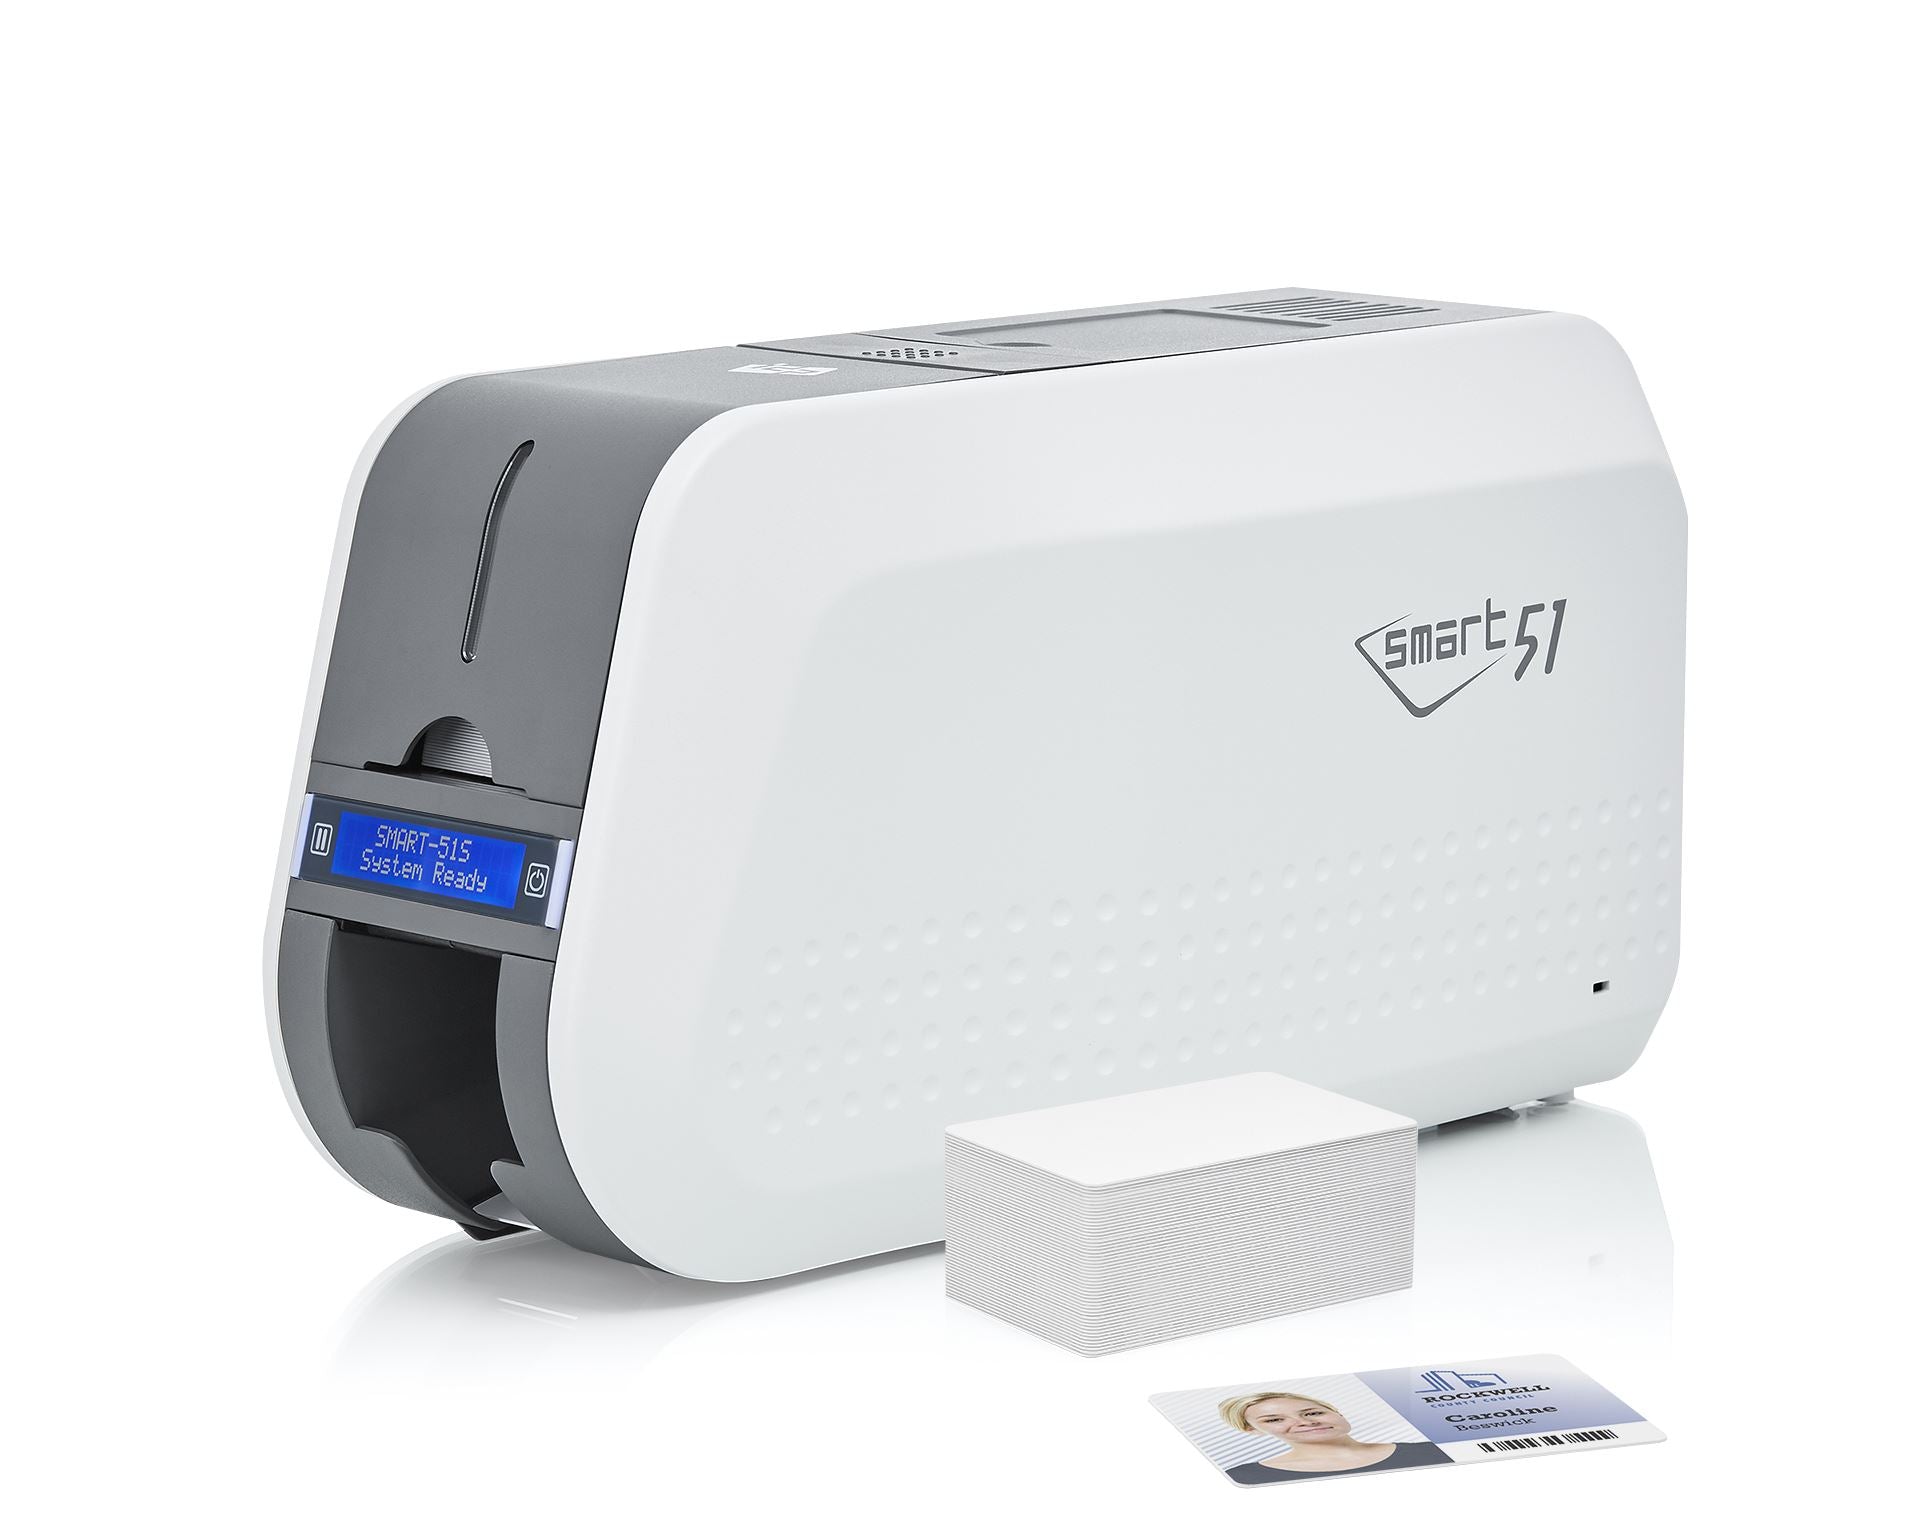 IDP Smart 51 ID Card Printer (Single-Sided) with Starter Pack & Tech Support